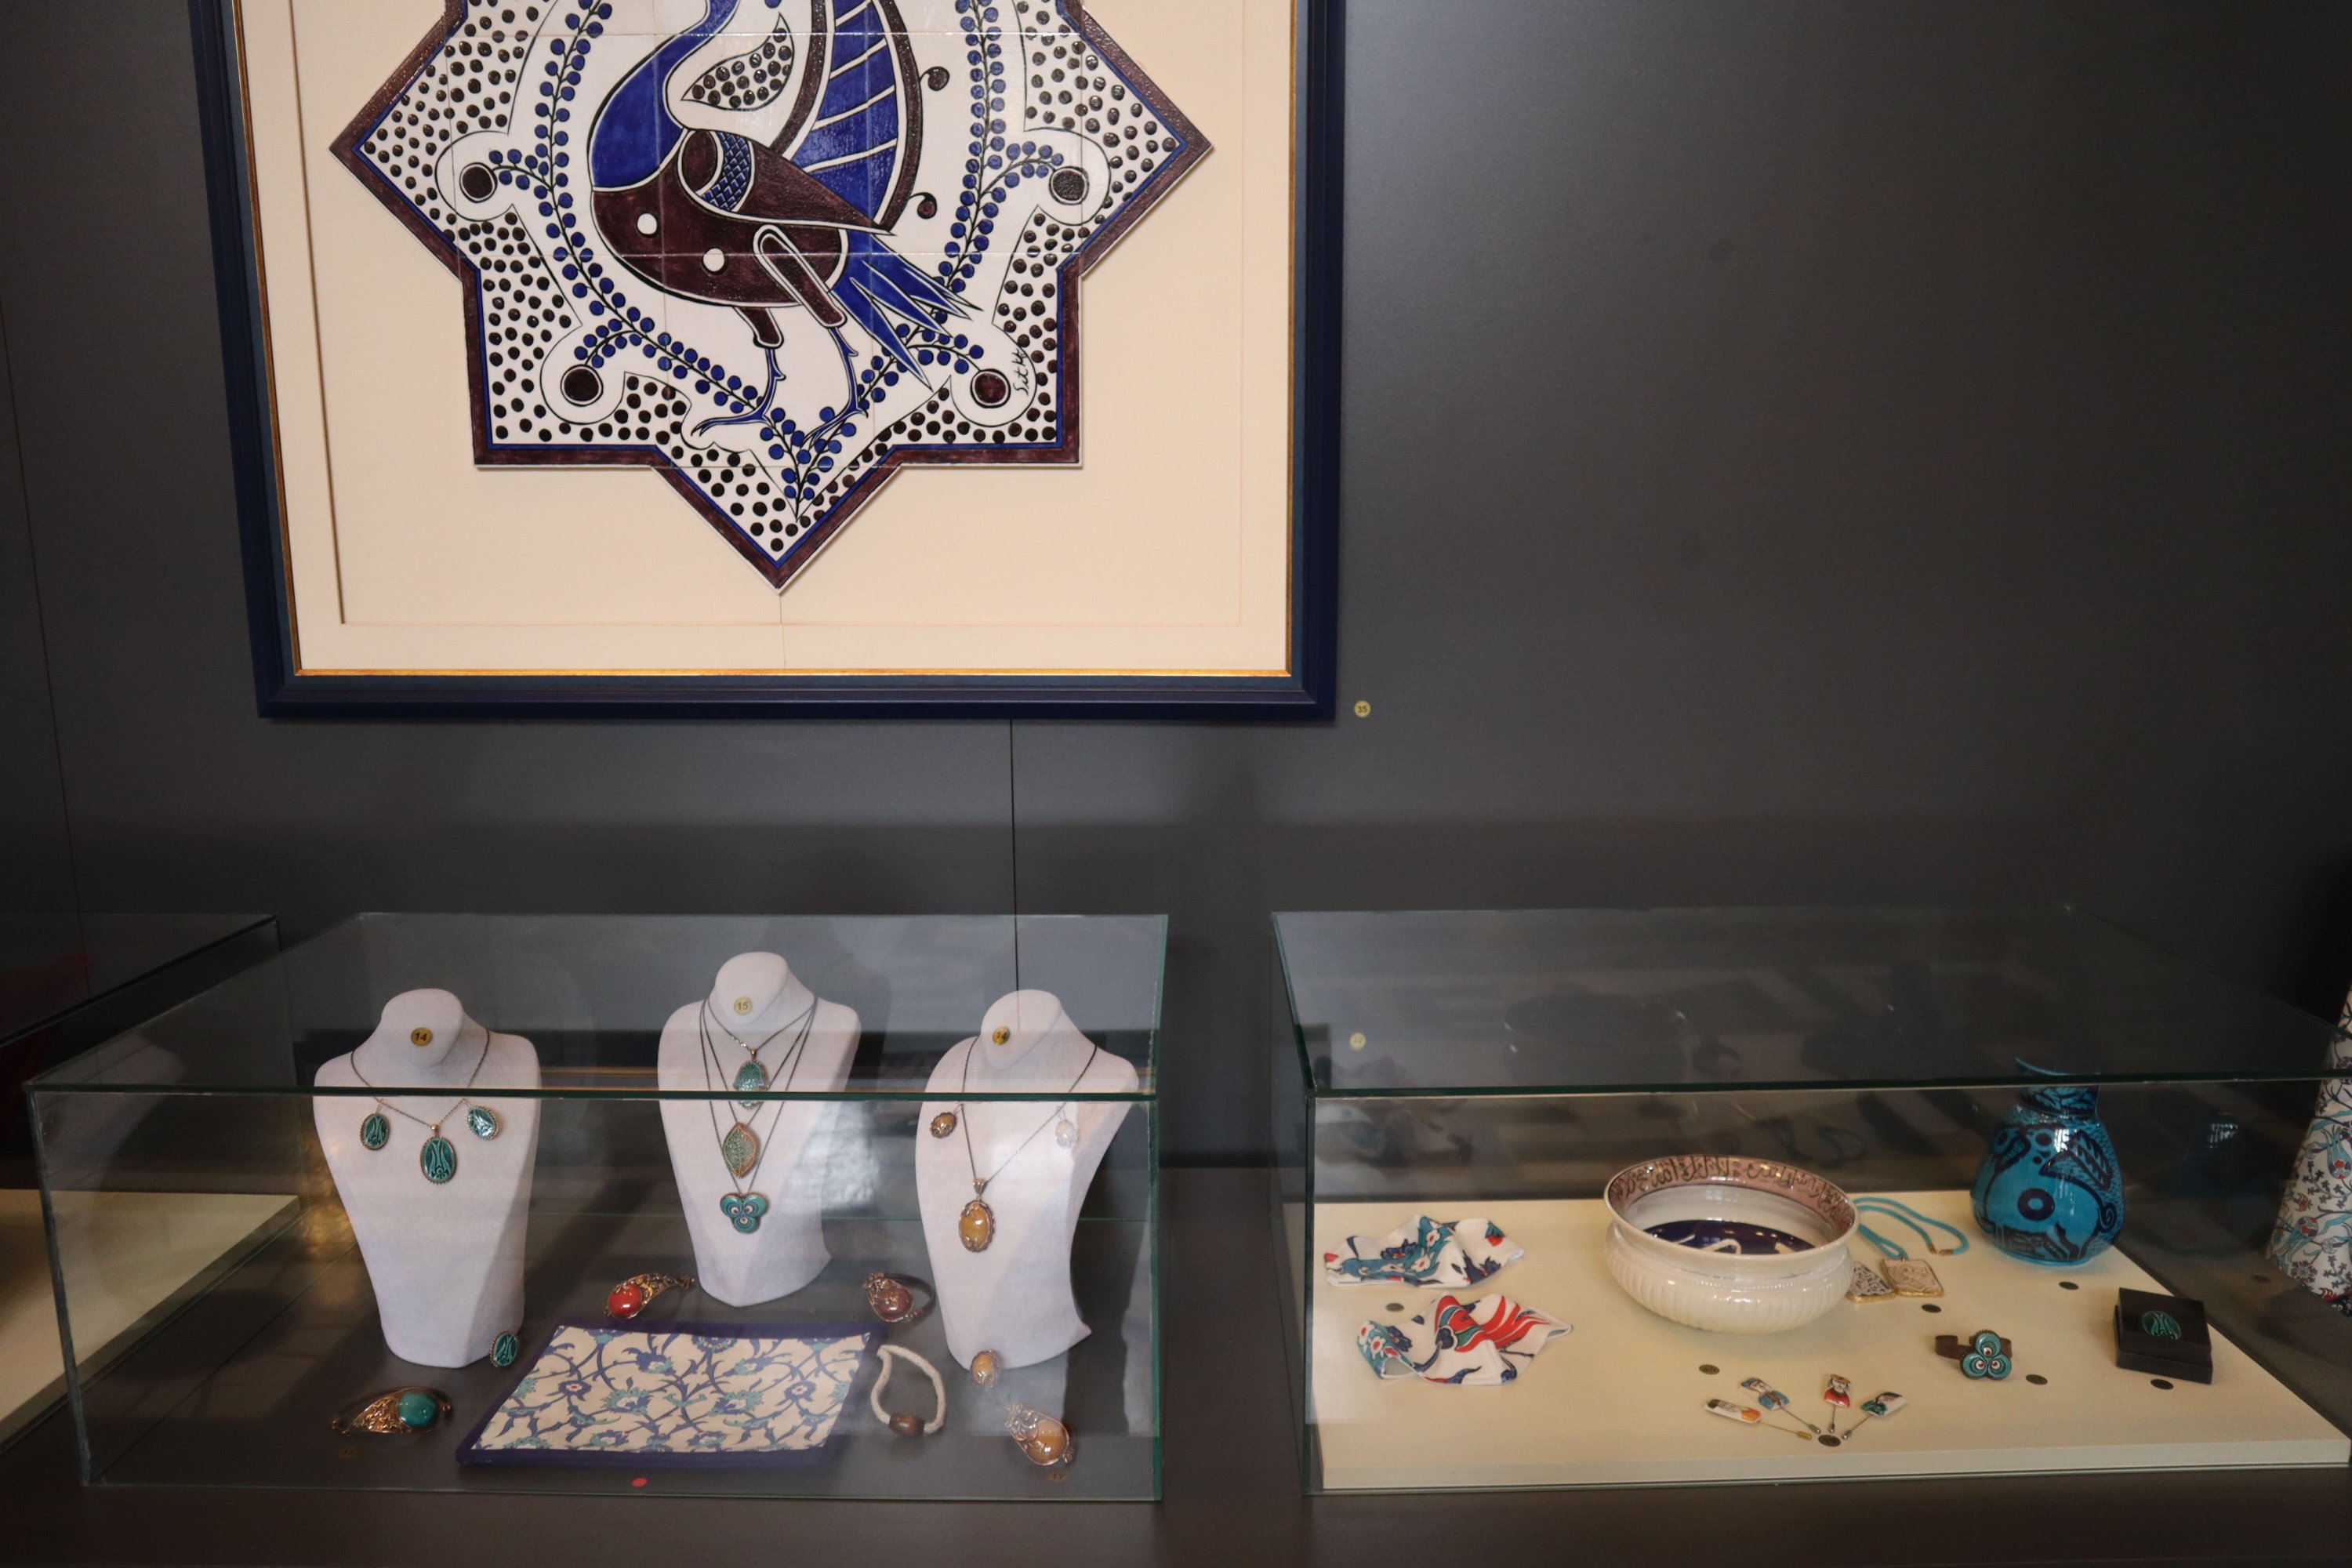 A selection of works decorated with tile patterns at the “Parliament Private Kütahya Collection Sıtkı" exhibition in the Turkish Parliament’s Hall of Honor, Ankara, Turkey, March 17, 2021. (Photo by Dilara Aslan)